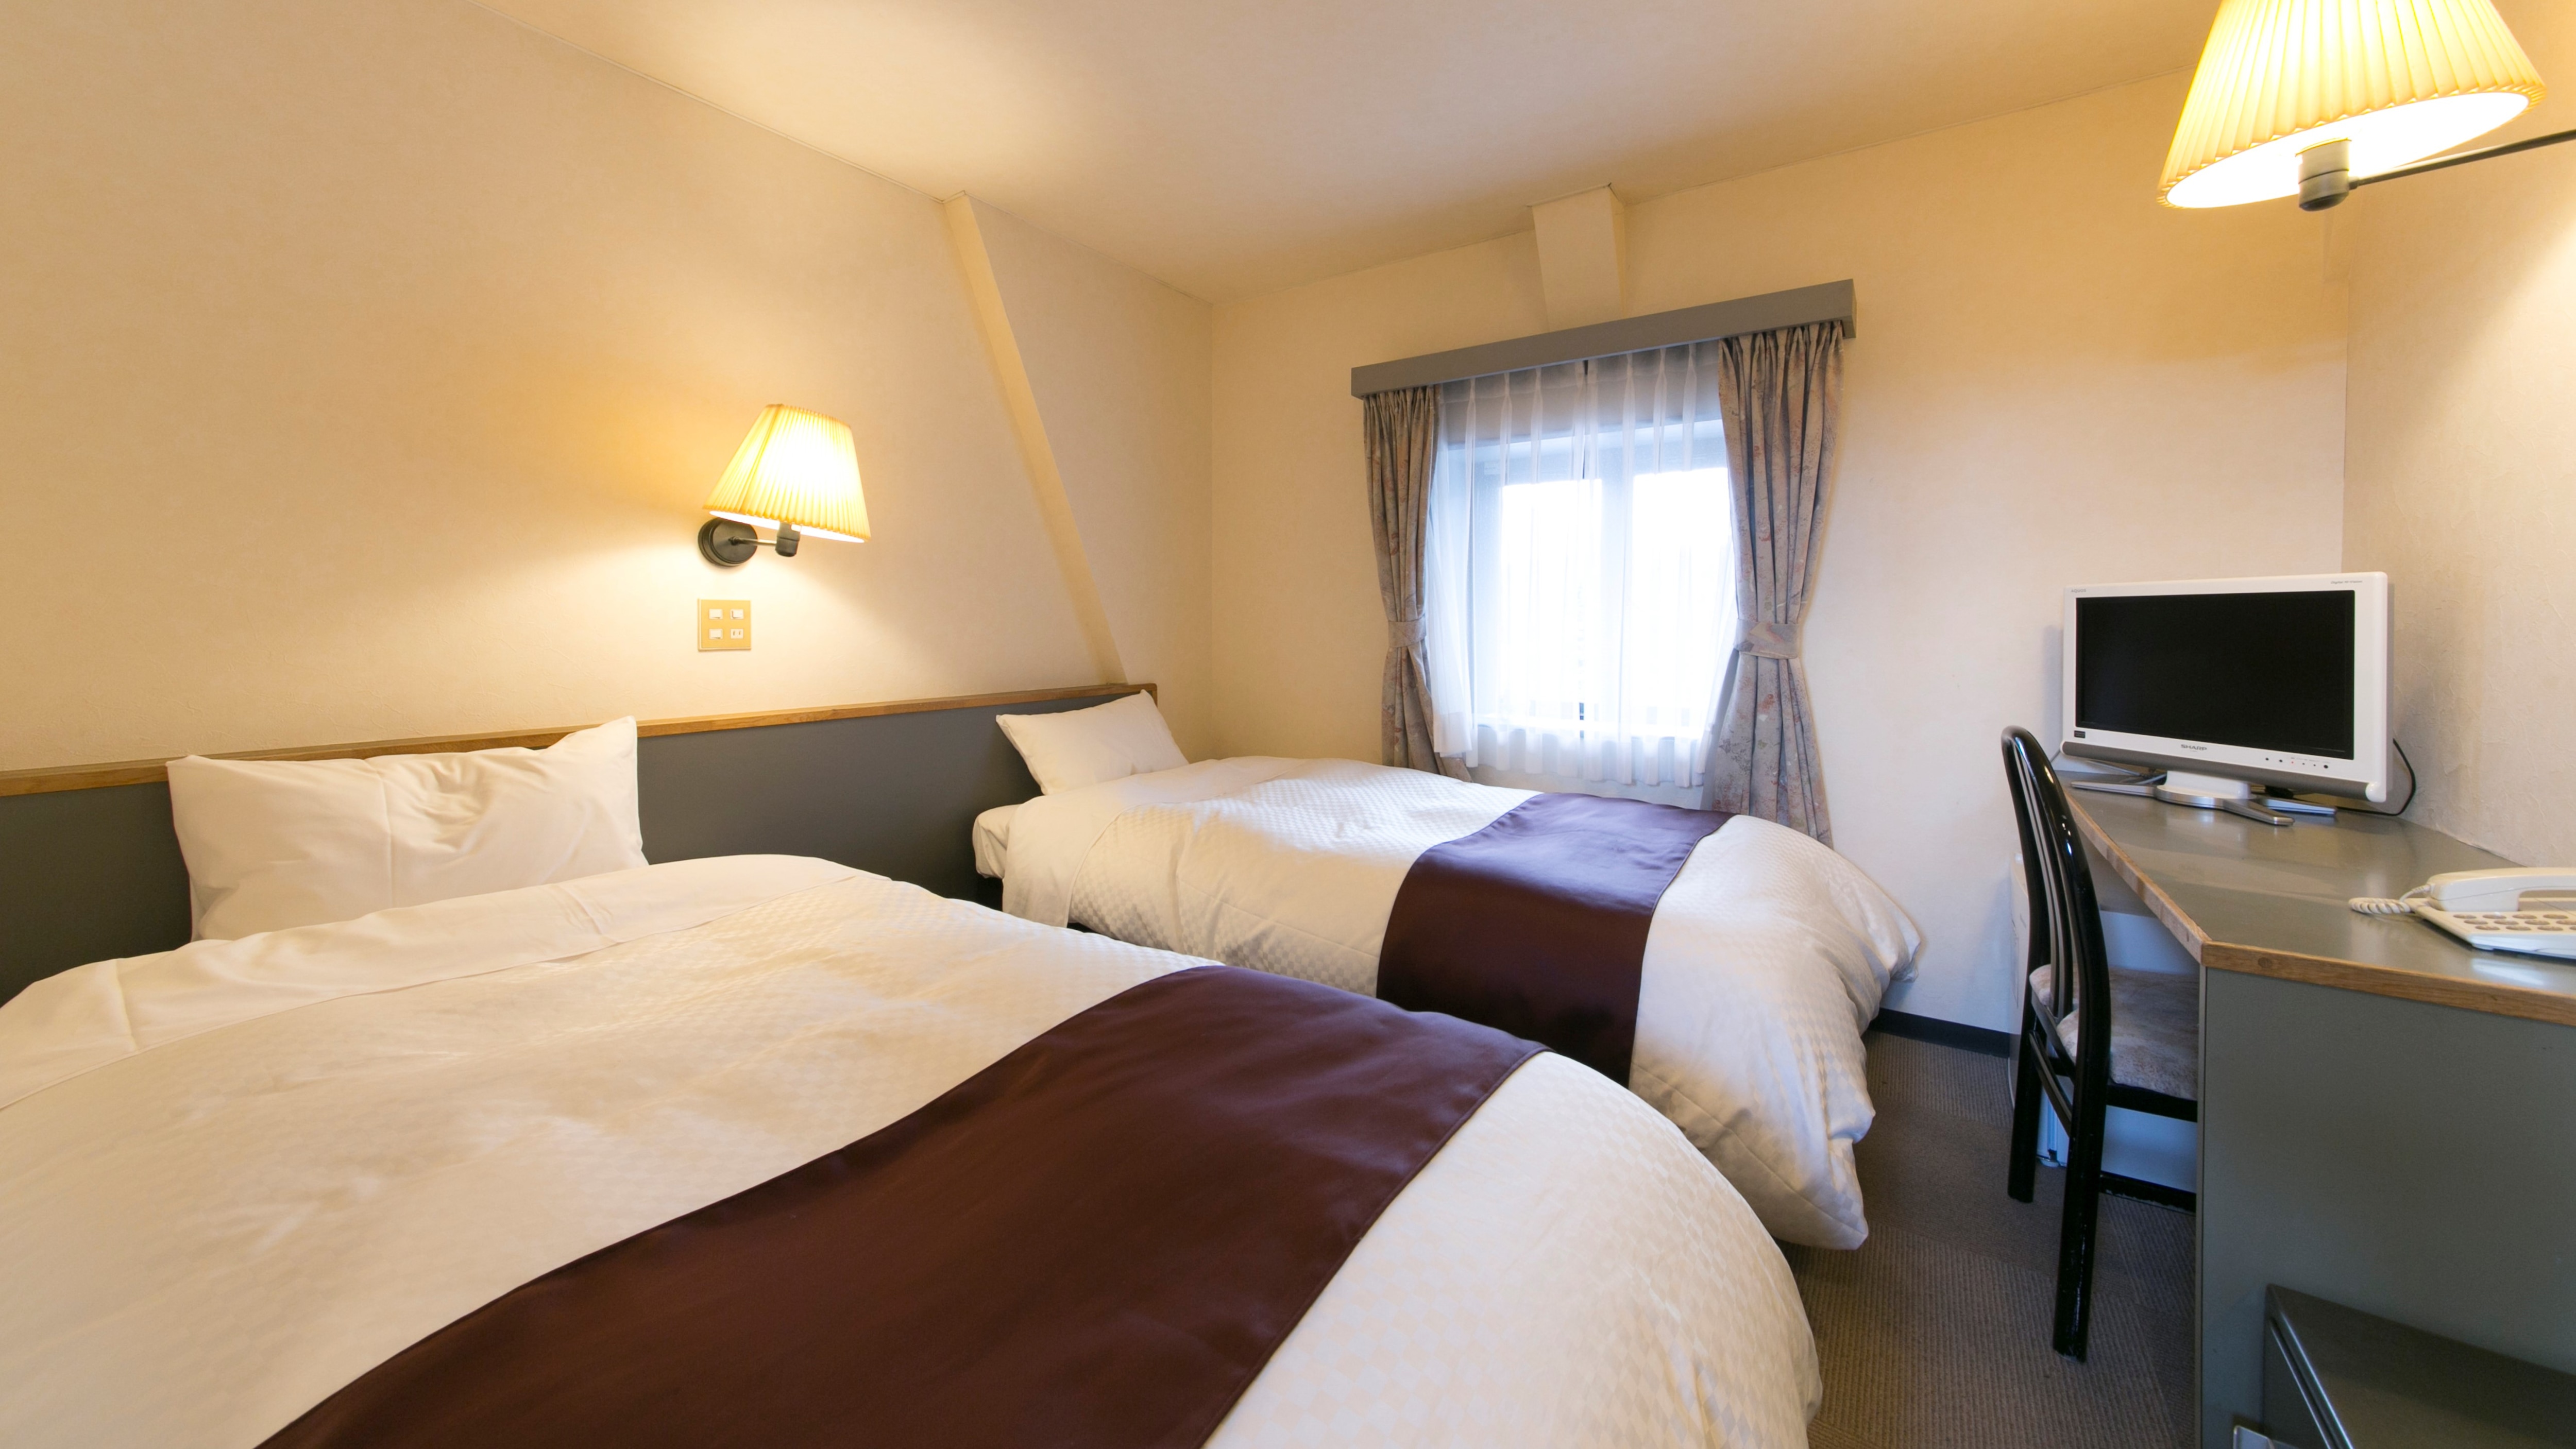 Western-style twin room (11㎡) * All rooms are non-smoking * Bath and toilet included